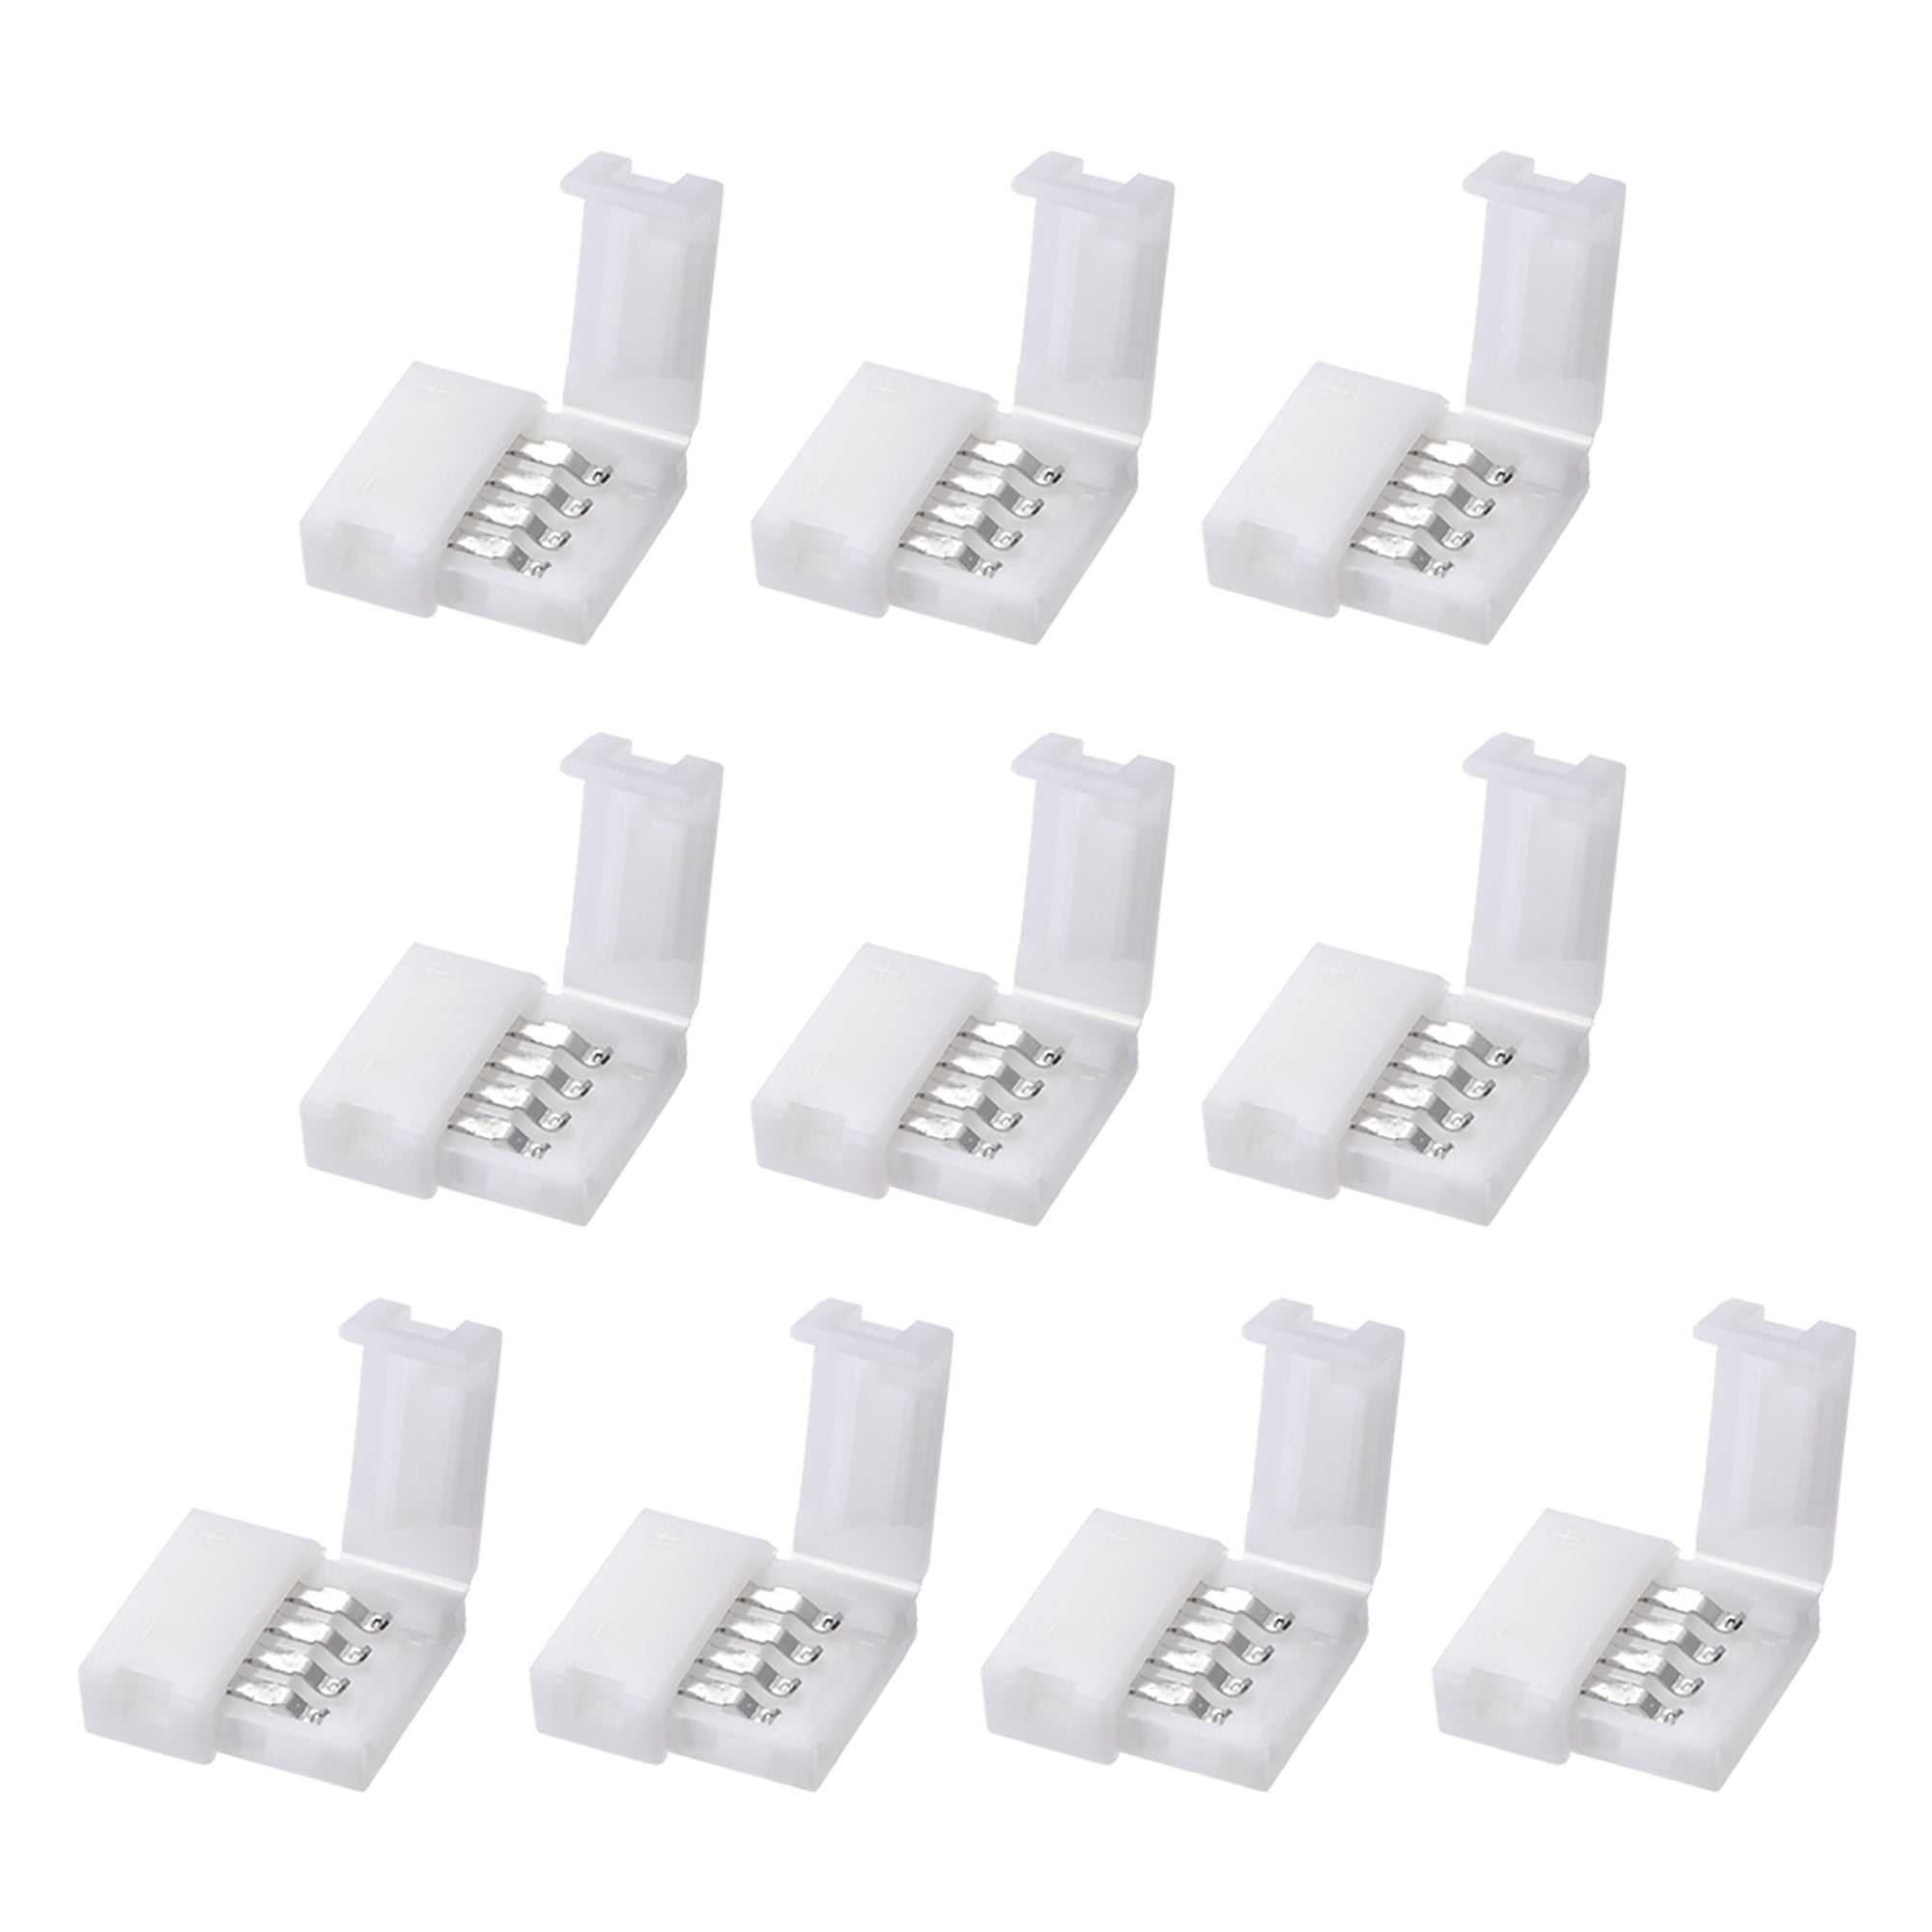 30pcs LED Connector Silicon Clip with Screws for Fixing 8mm 10mm 12mm PCB  Non-waterproof 3528 5050 5630 LED Strip